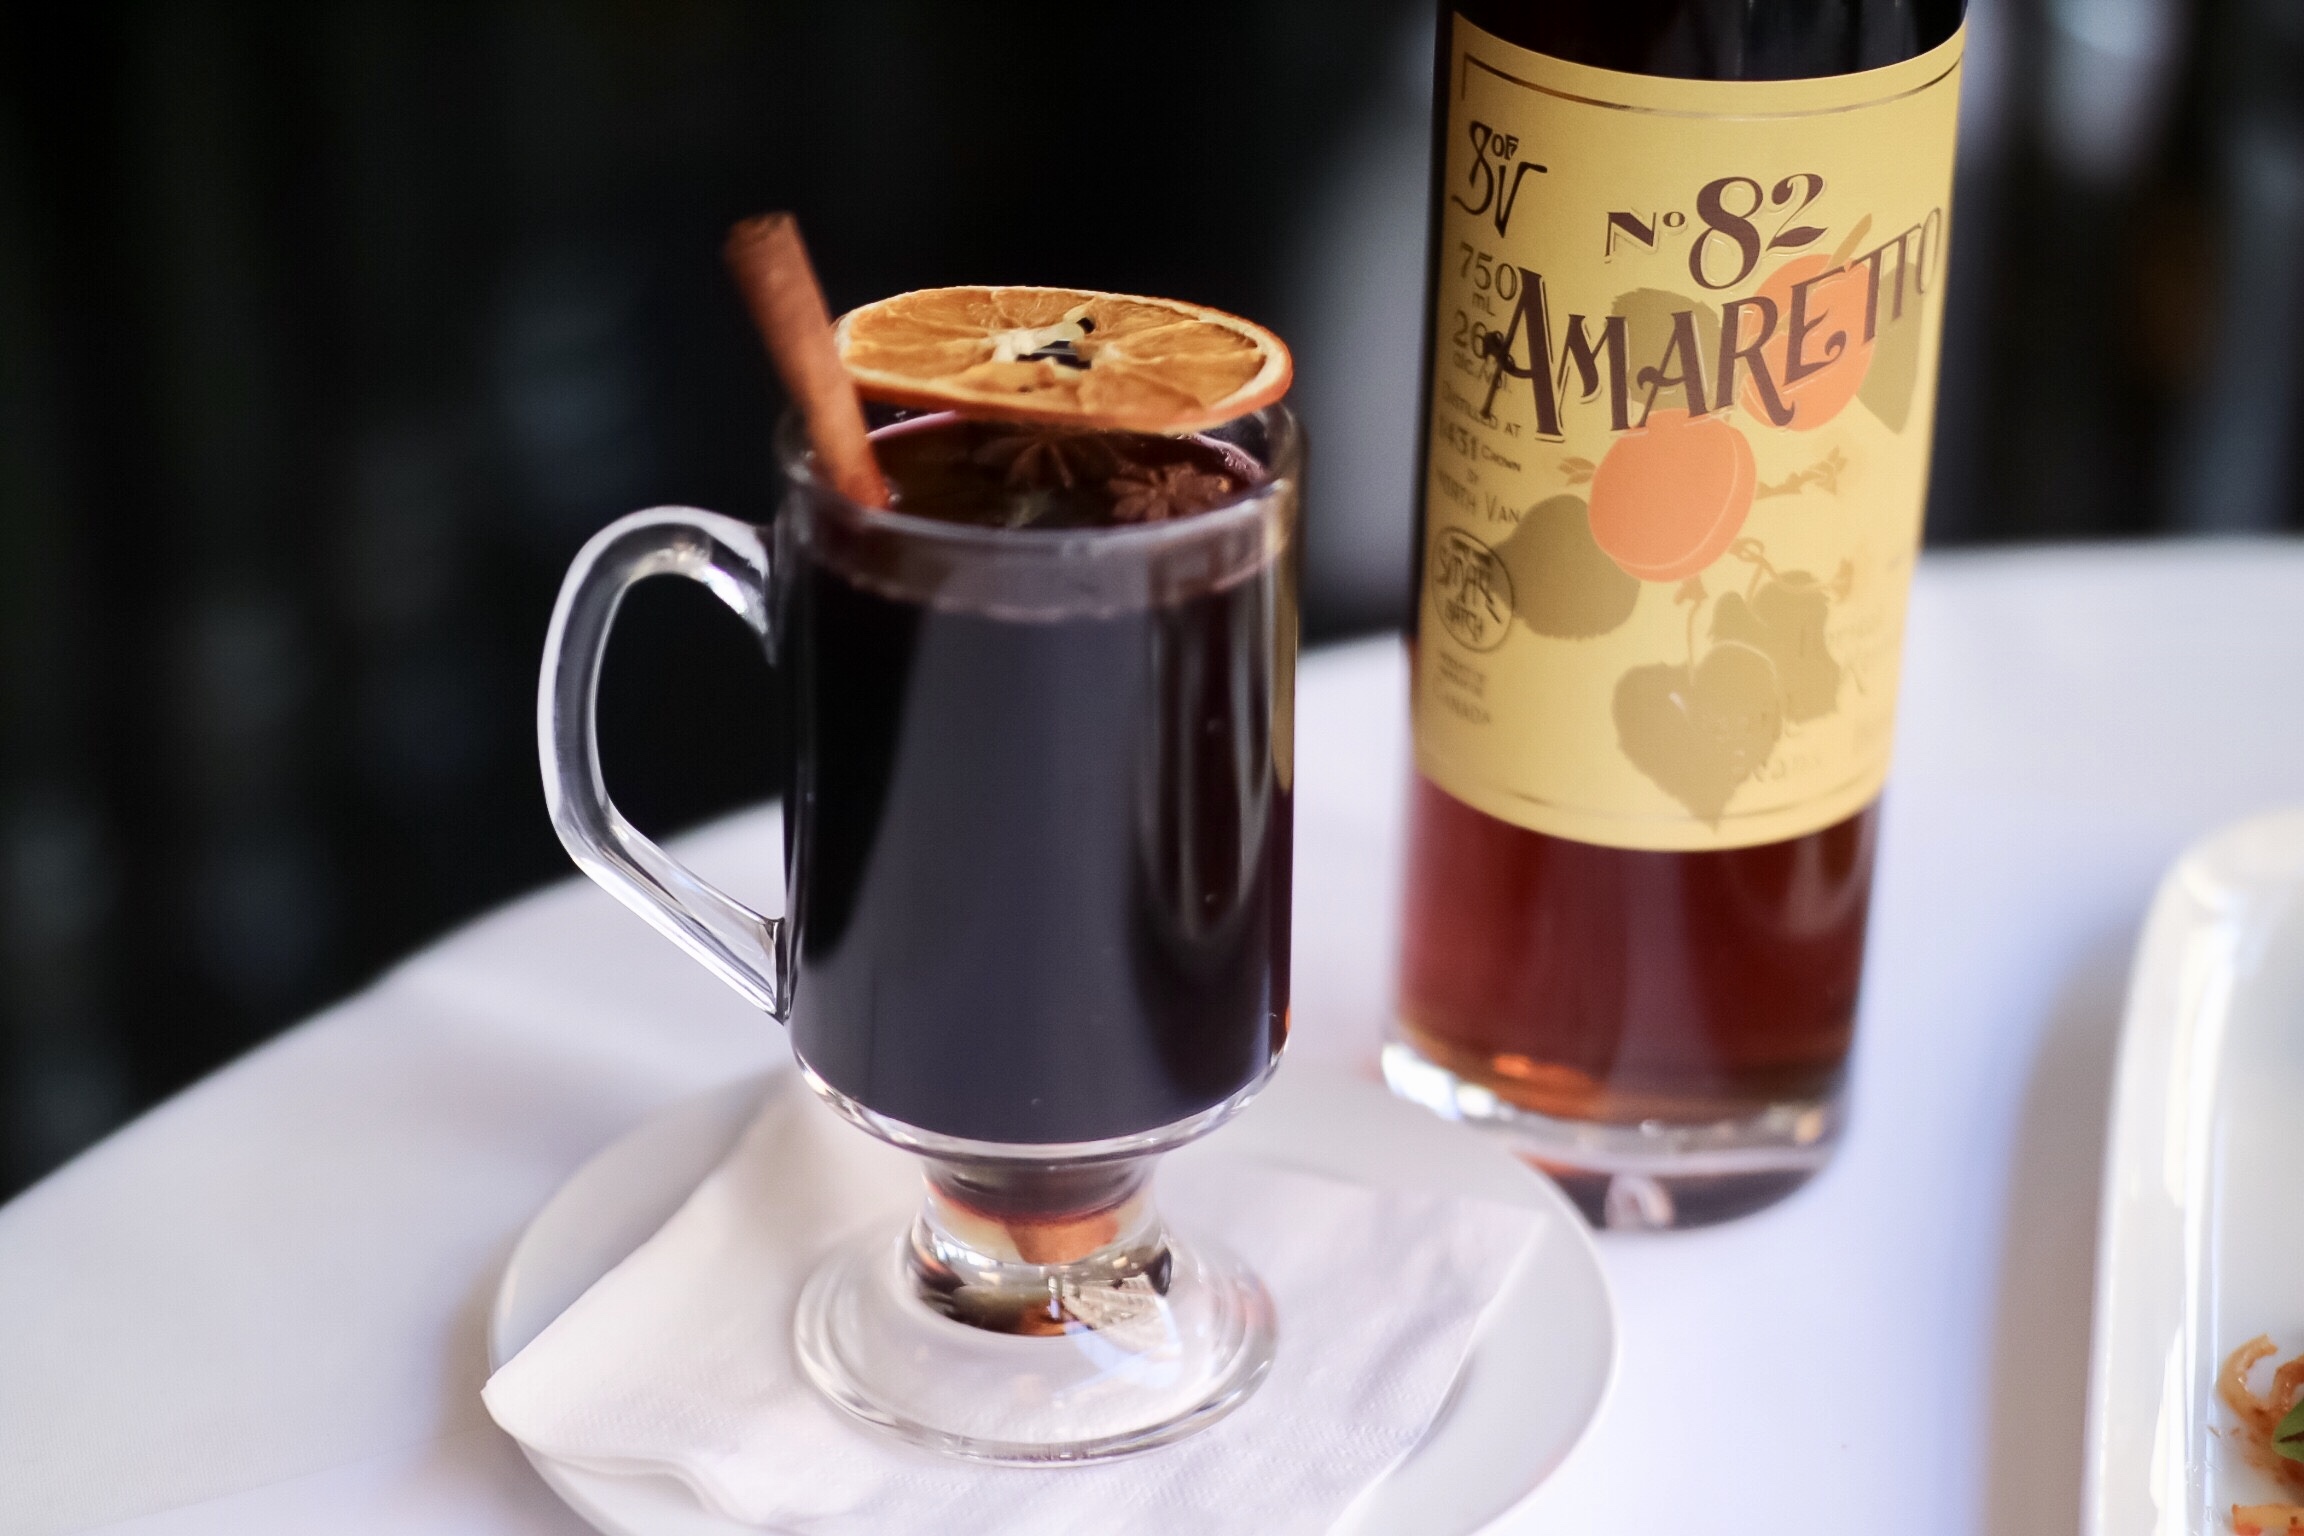 "Isabel’s Mulled Wine will warm your soul"